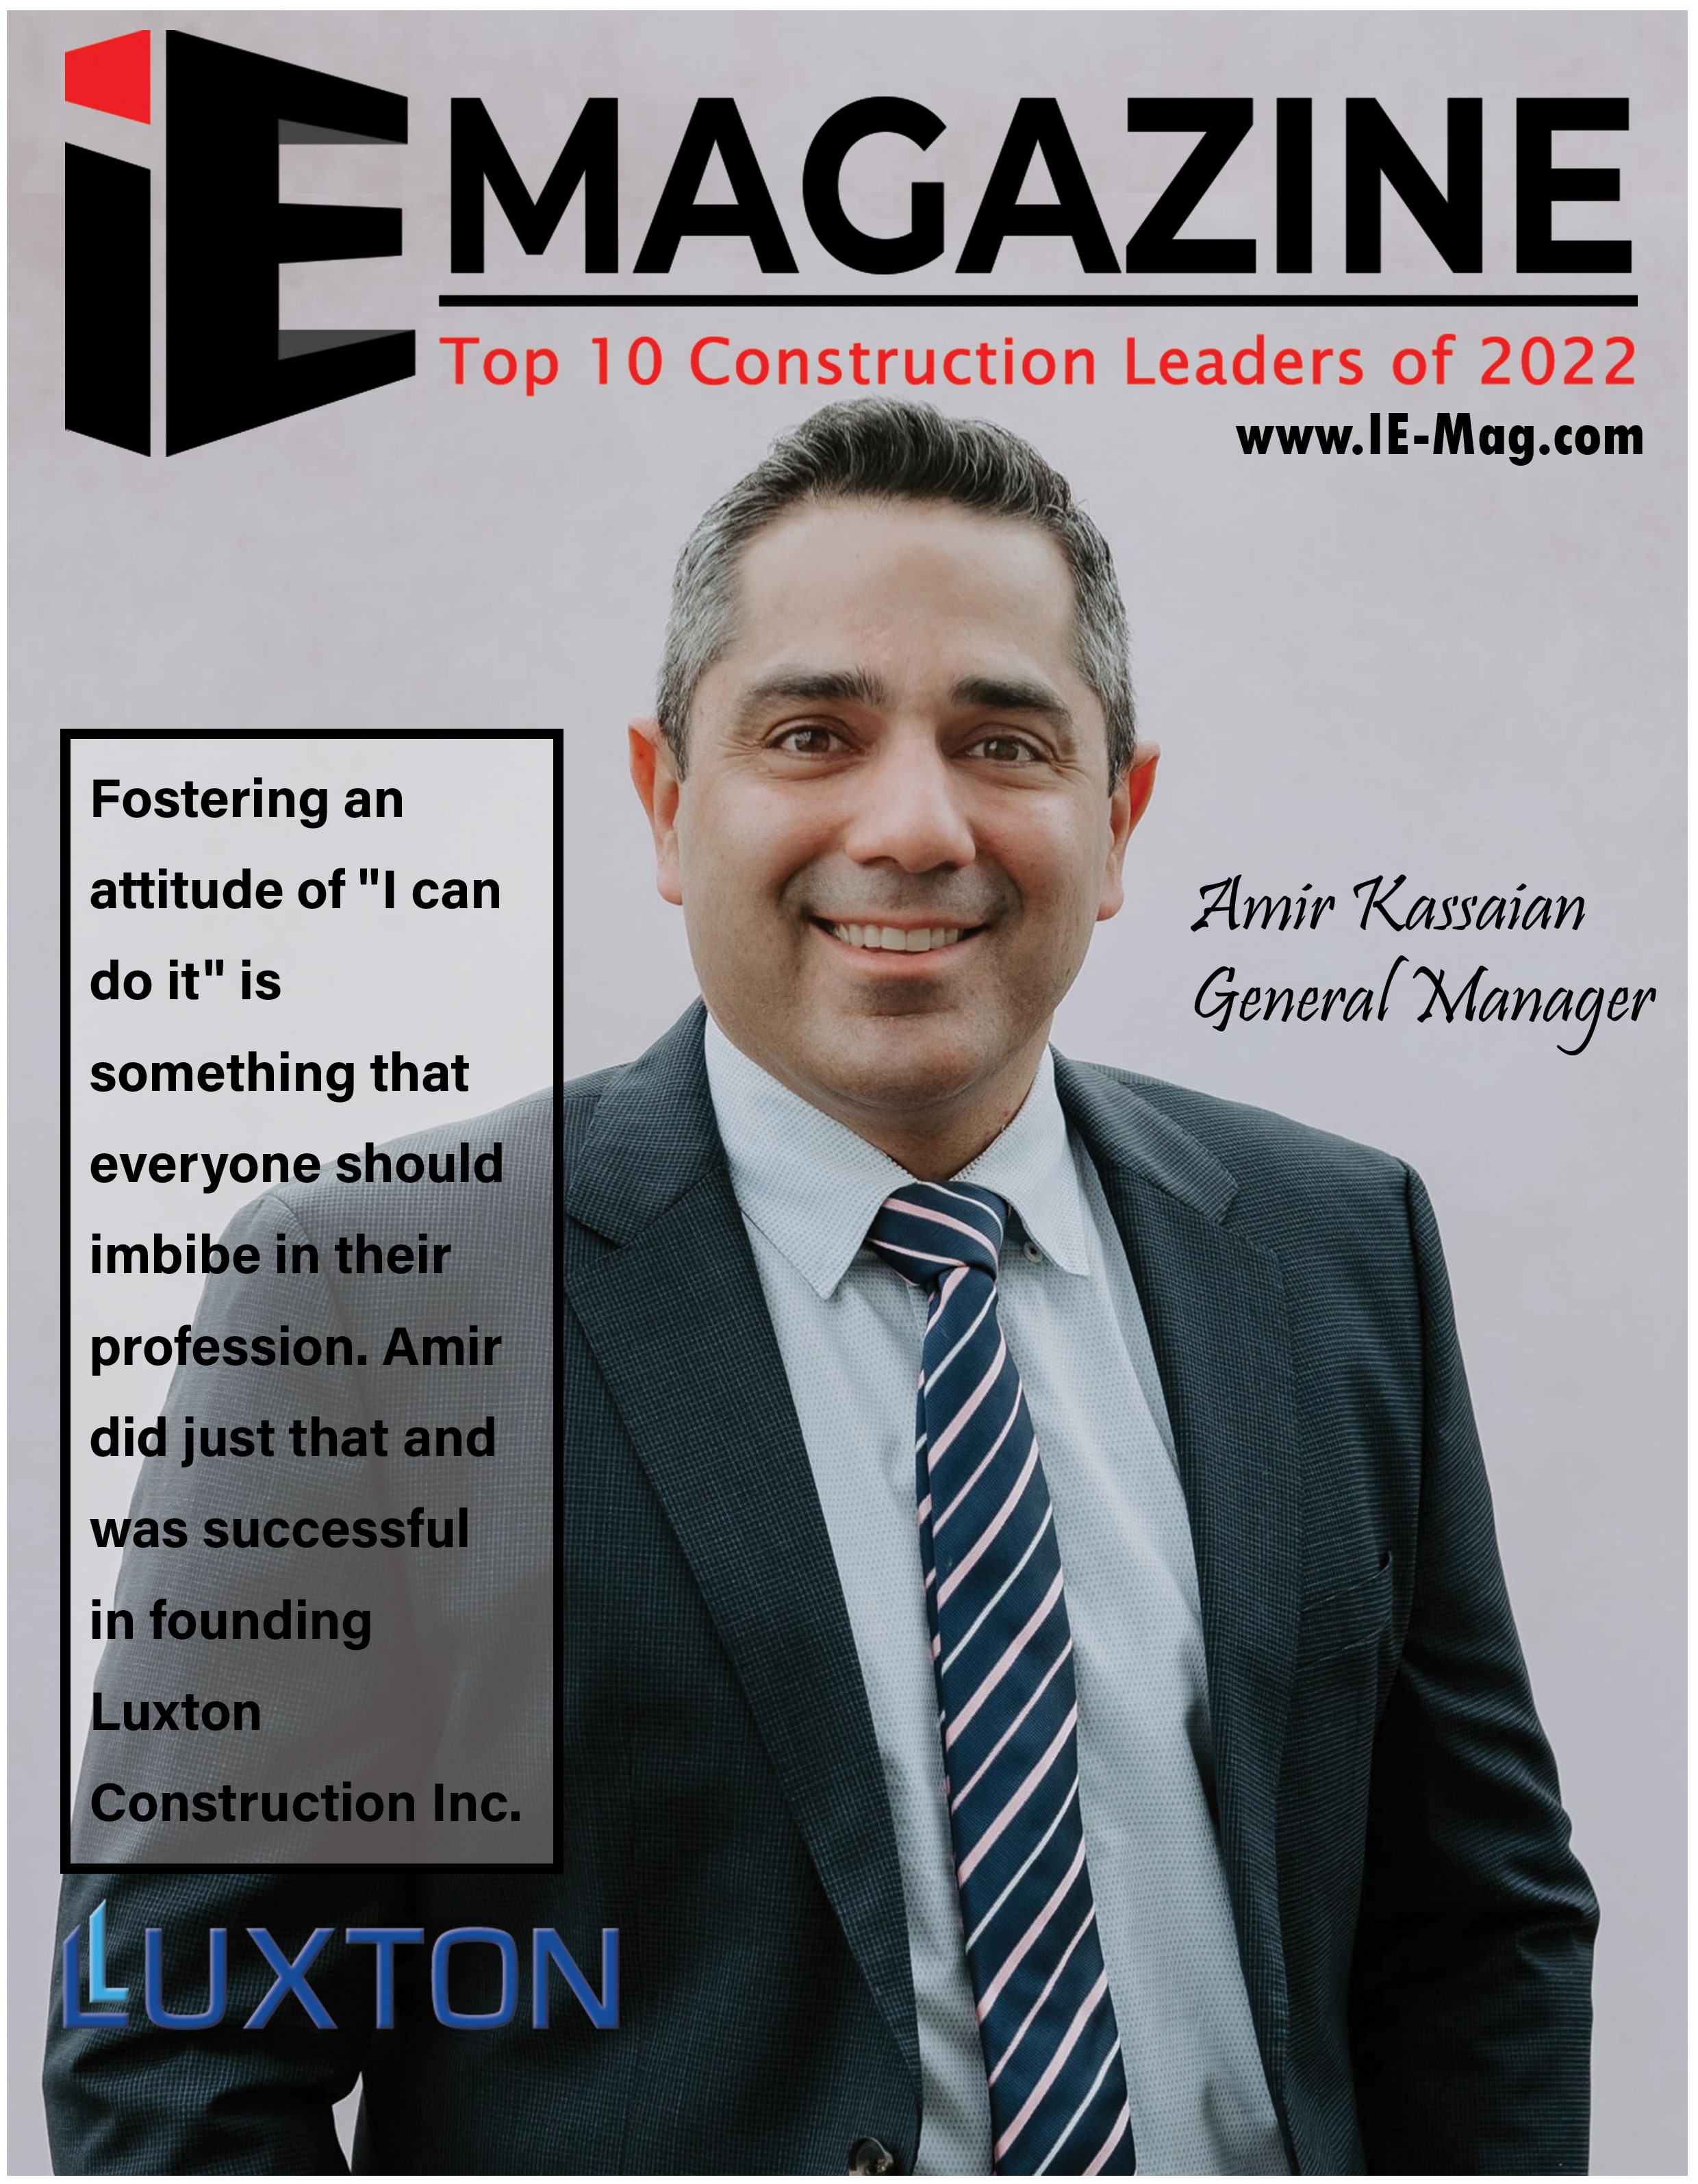 Top 10 Construction Leaders of 2022 Magazine